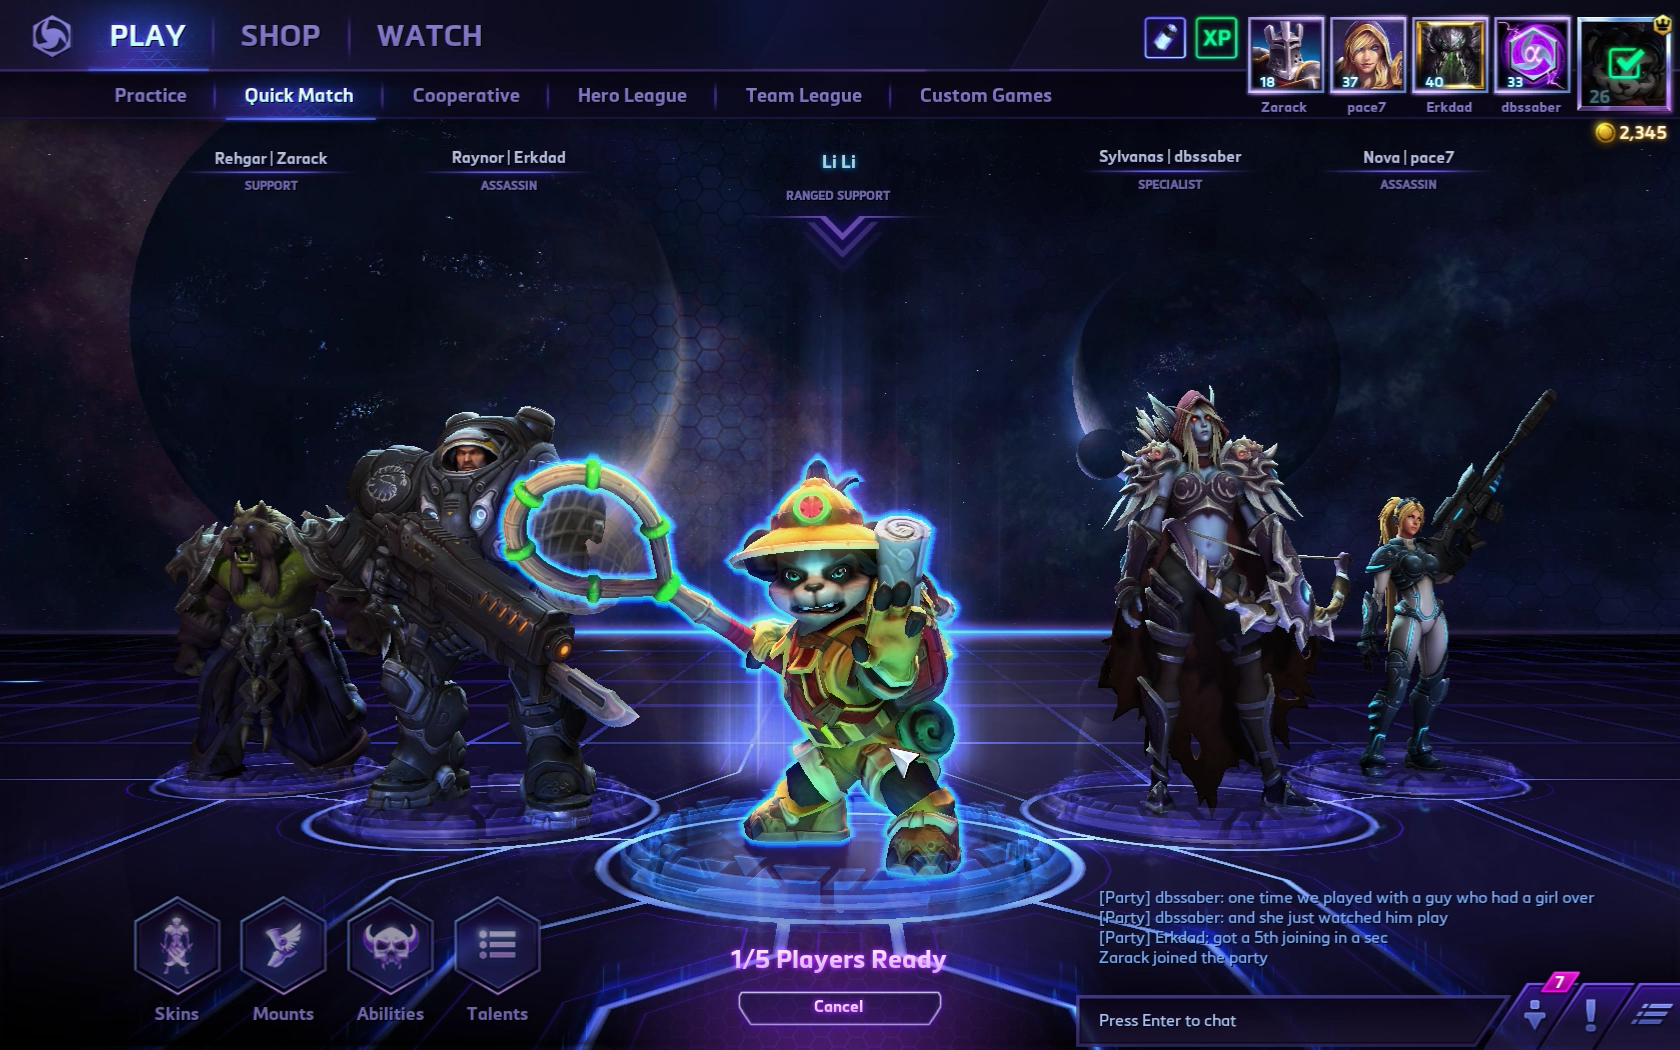 heroes of the storm feel clunky